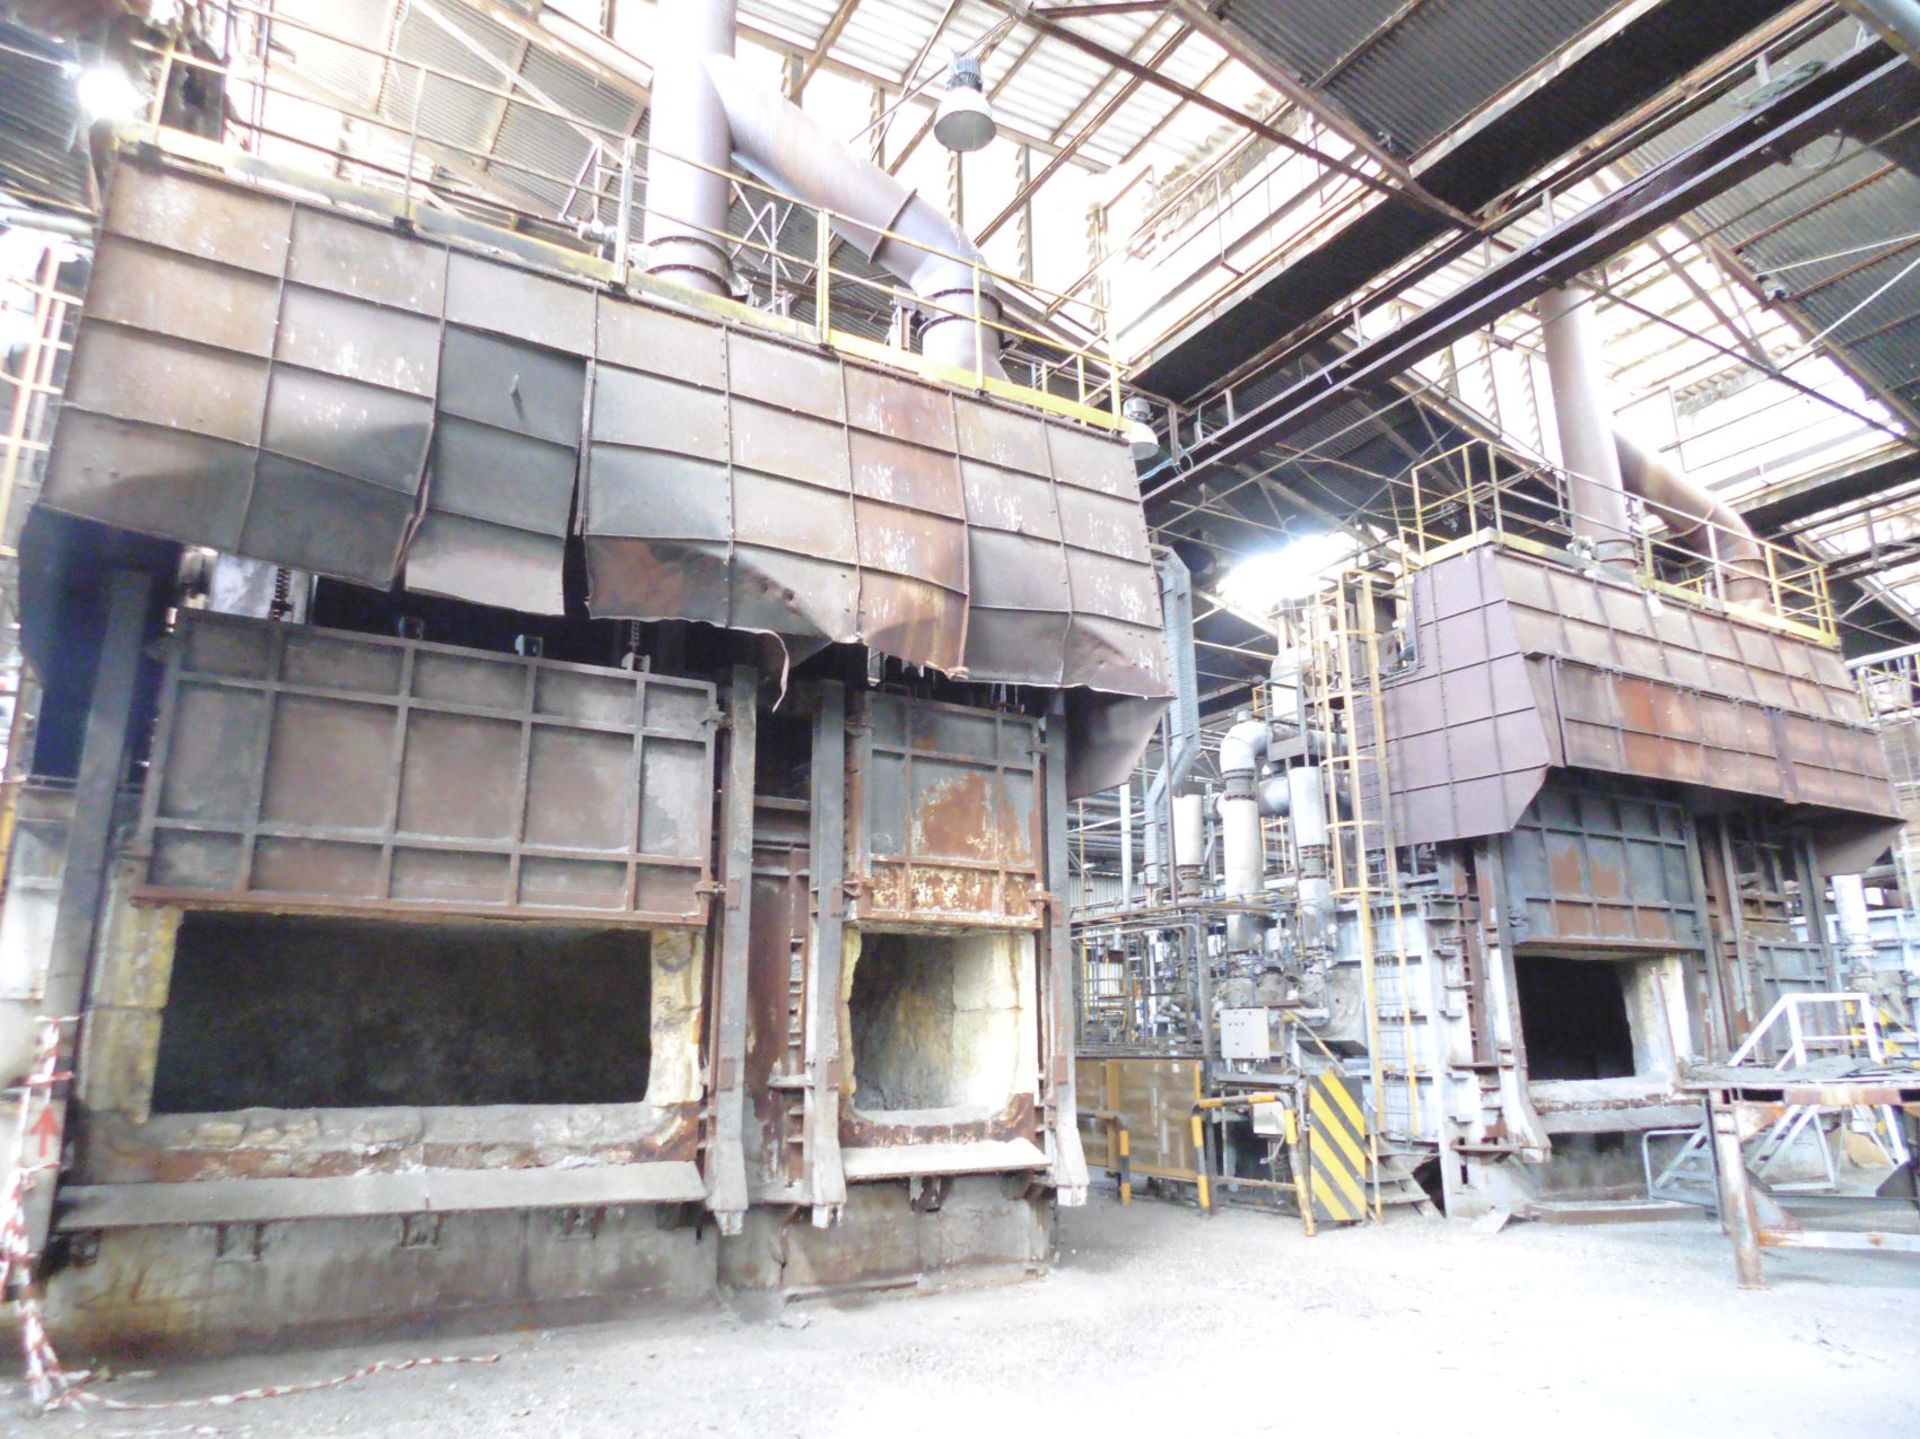 35 Ton and 30 Ton Aluminium Melting Furnaces; both with Low Sulphur Oil Burner Combustion Systems